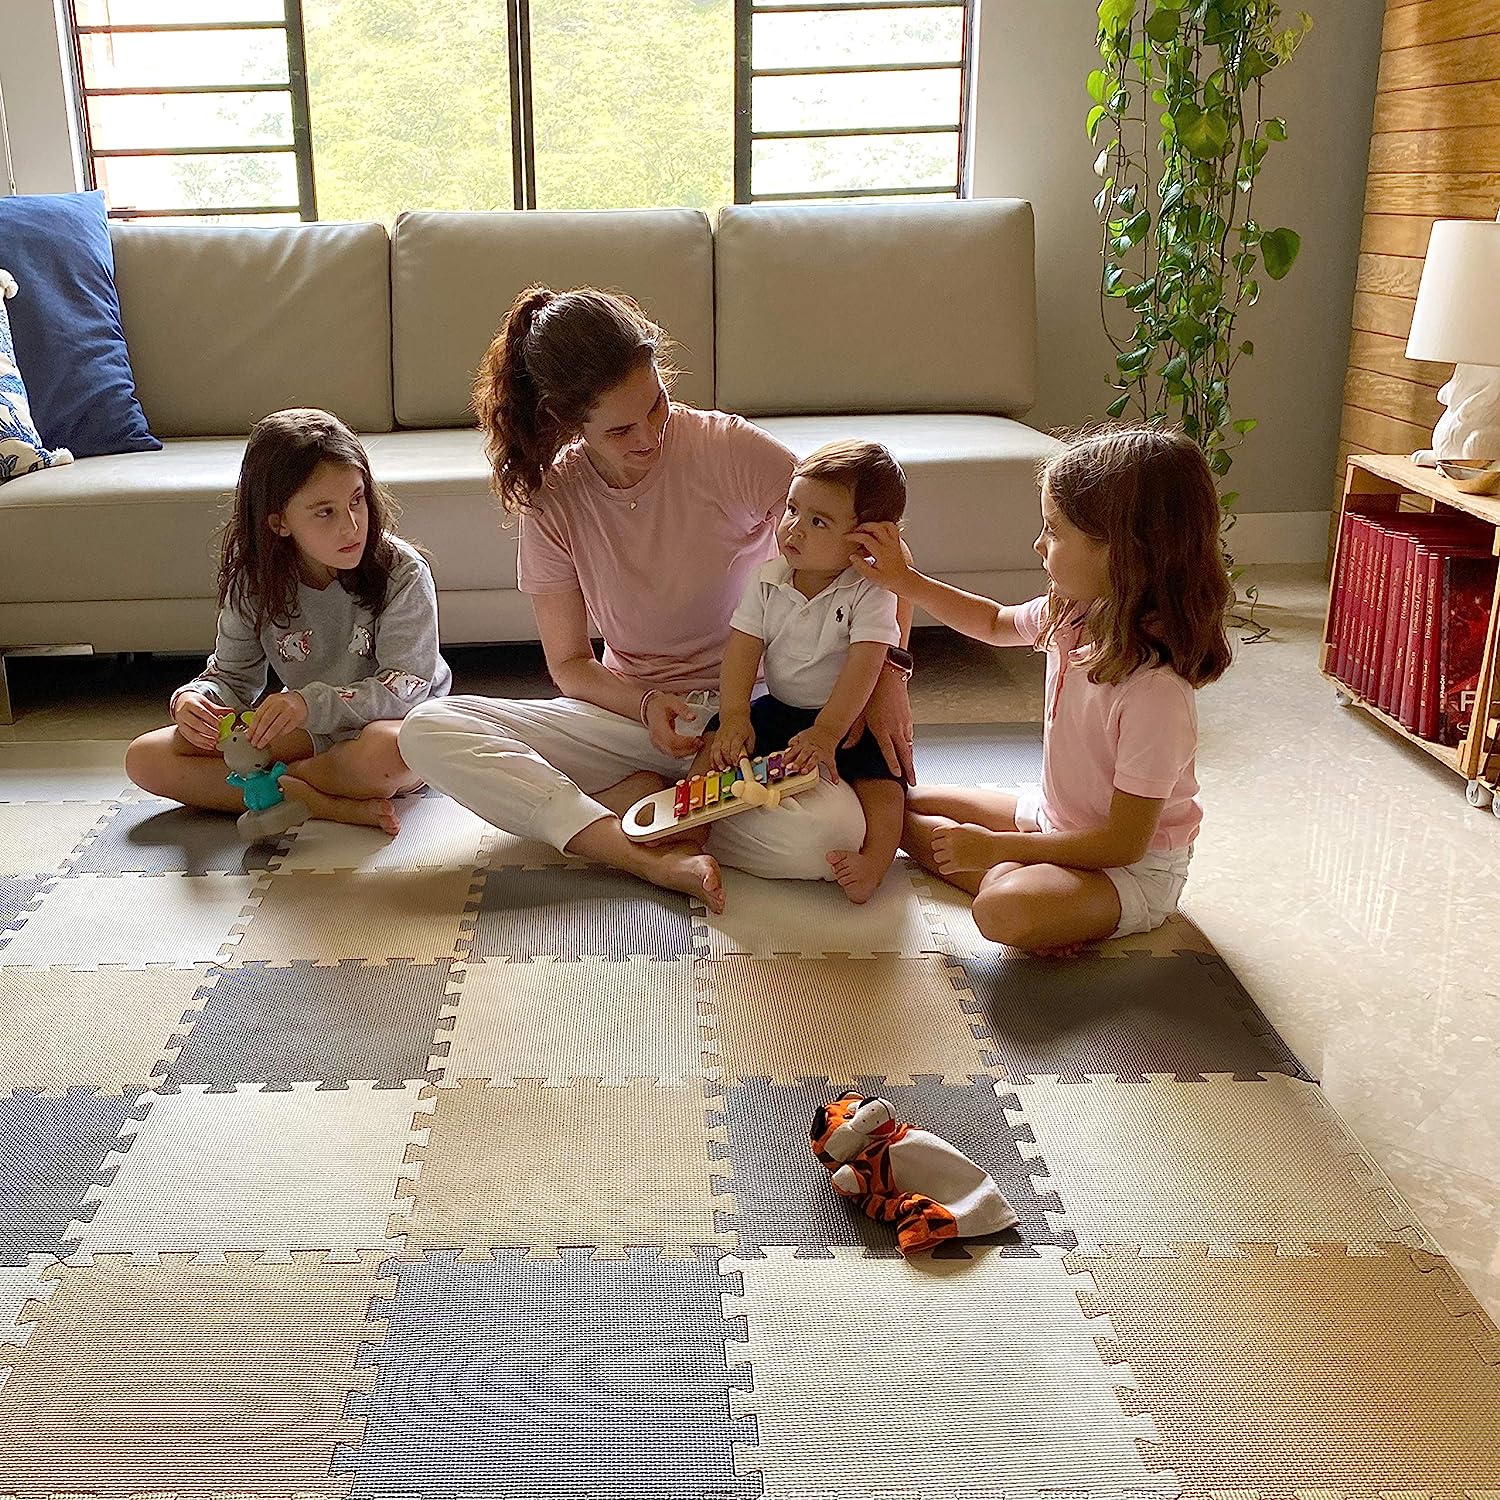 Non-Toxic Foam Puzzle Floor Mat, Comfortable, Extra Thick, Cushiony  Exercise and Play Mat for Toddlers, Kids & Adults, 16 Tiles (12x12)